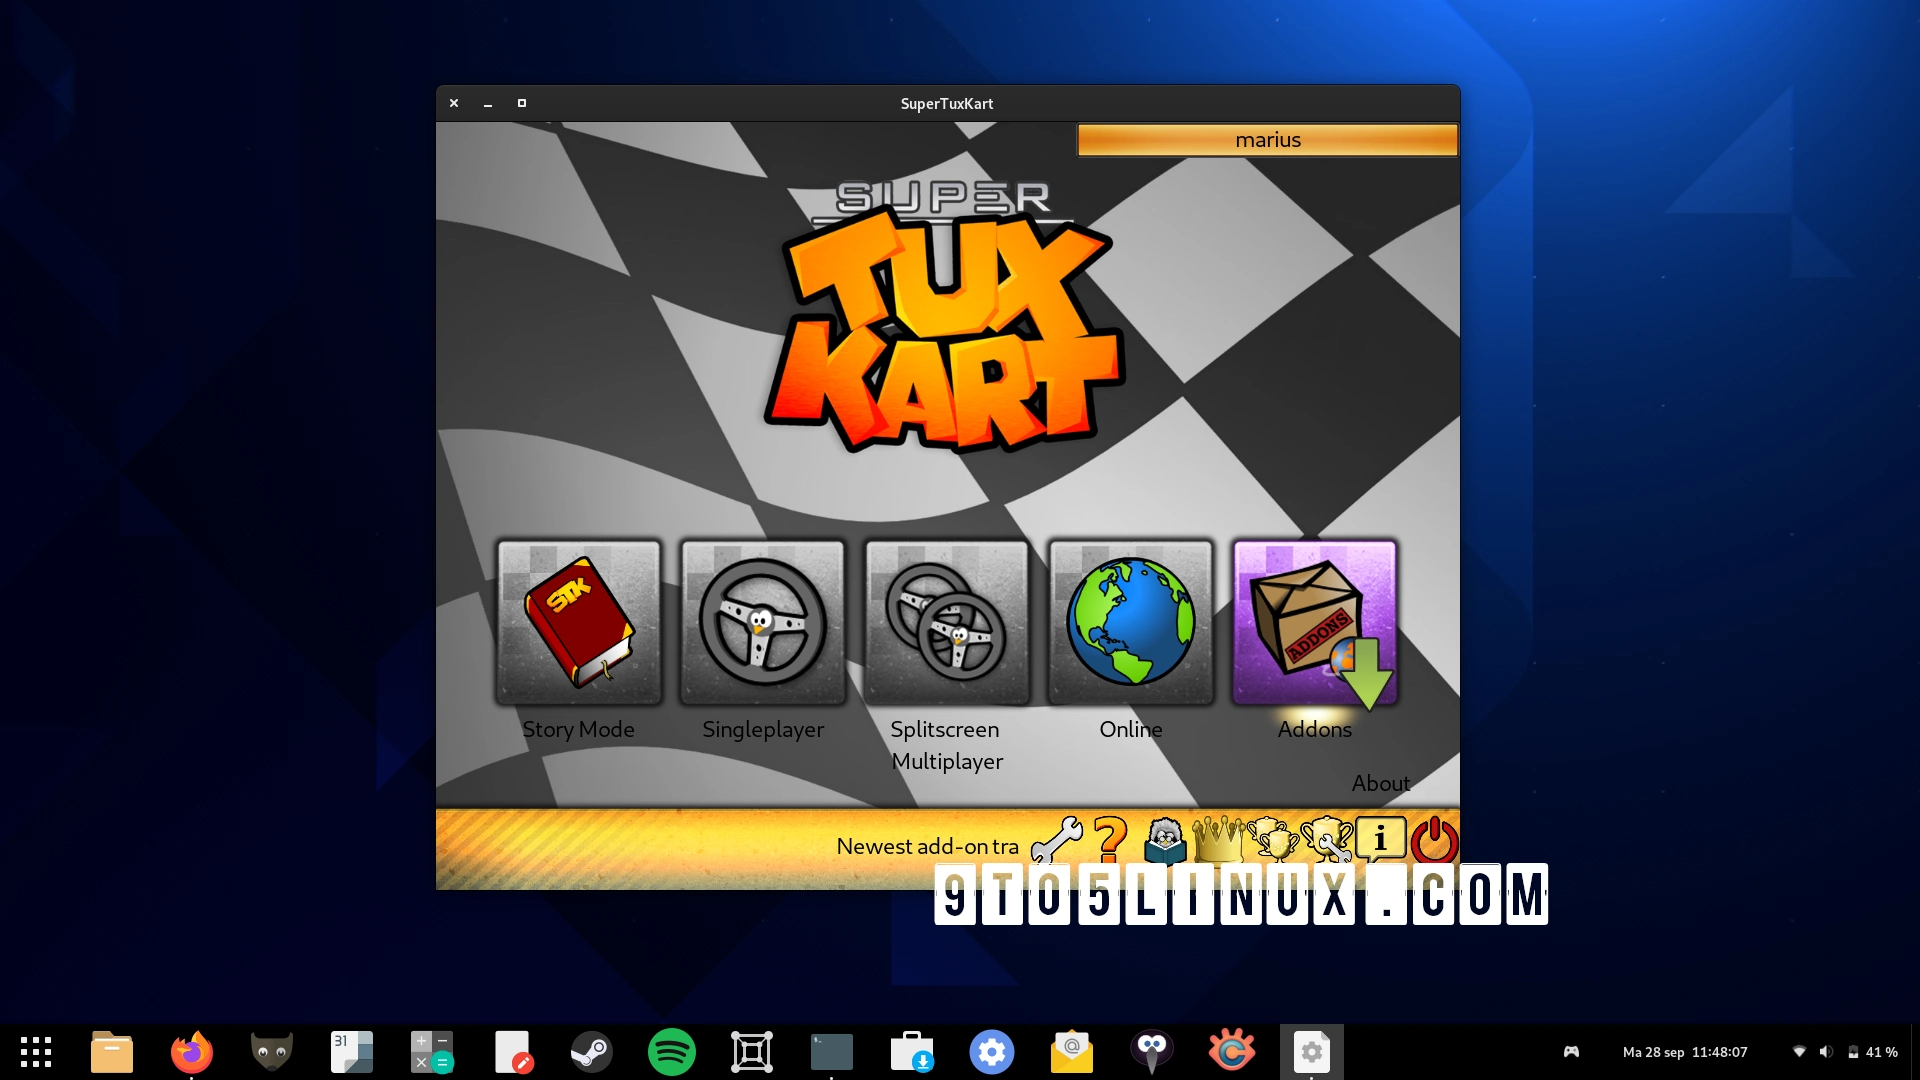 SuperTuxKart 1.3 Released with New Arenas, New Karts, and GUI Improvements